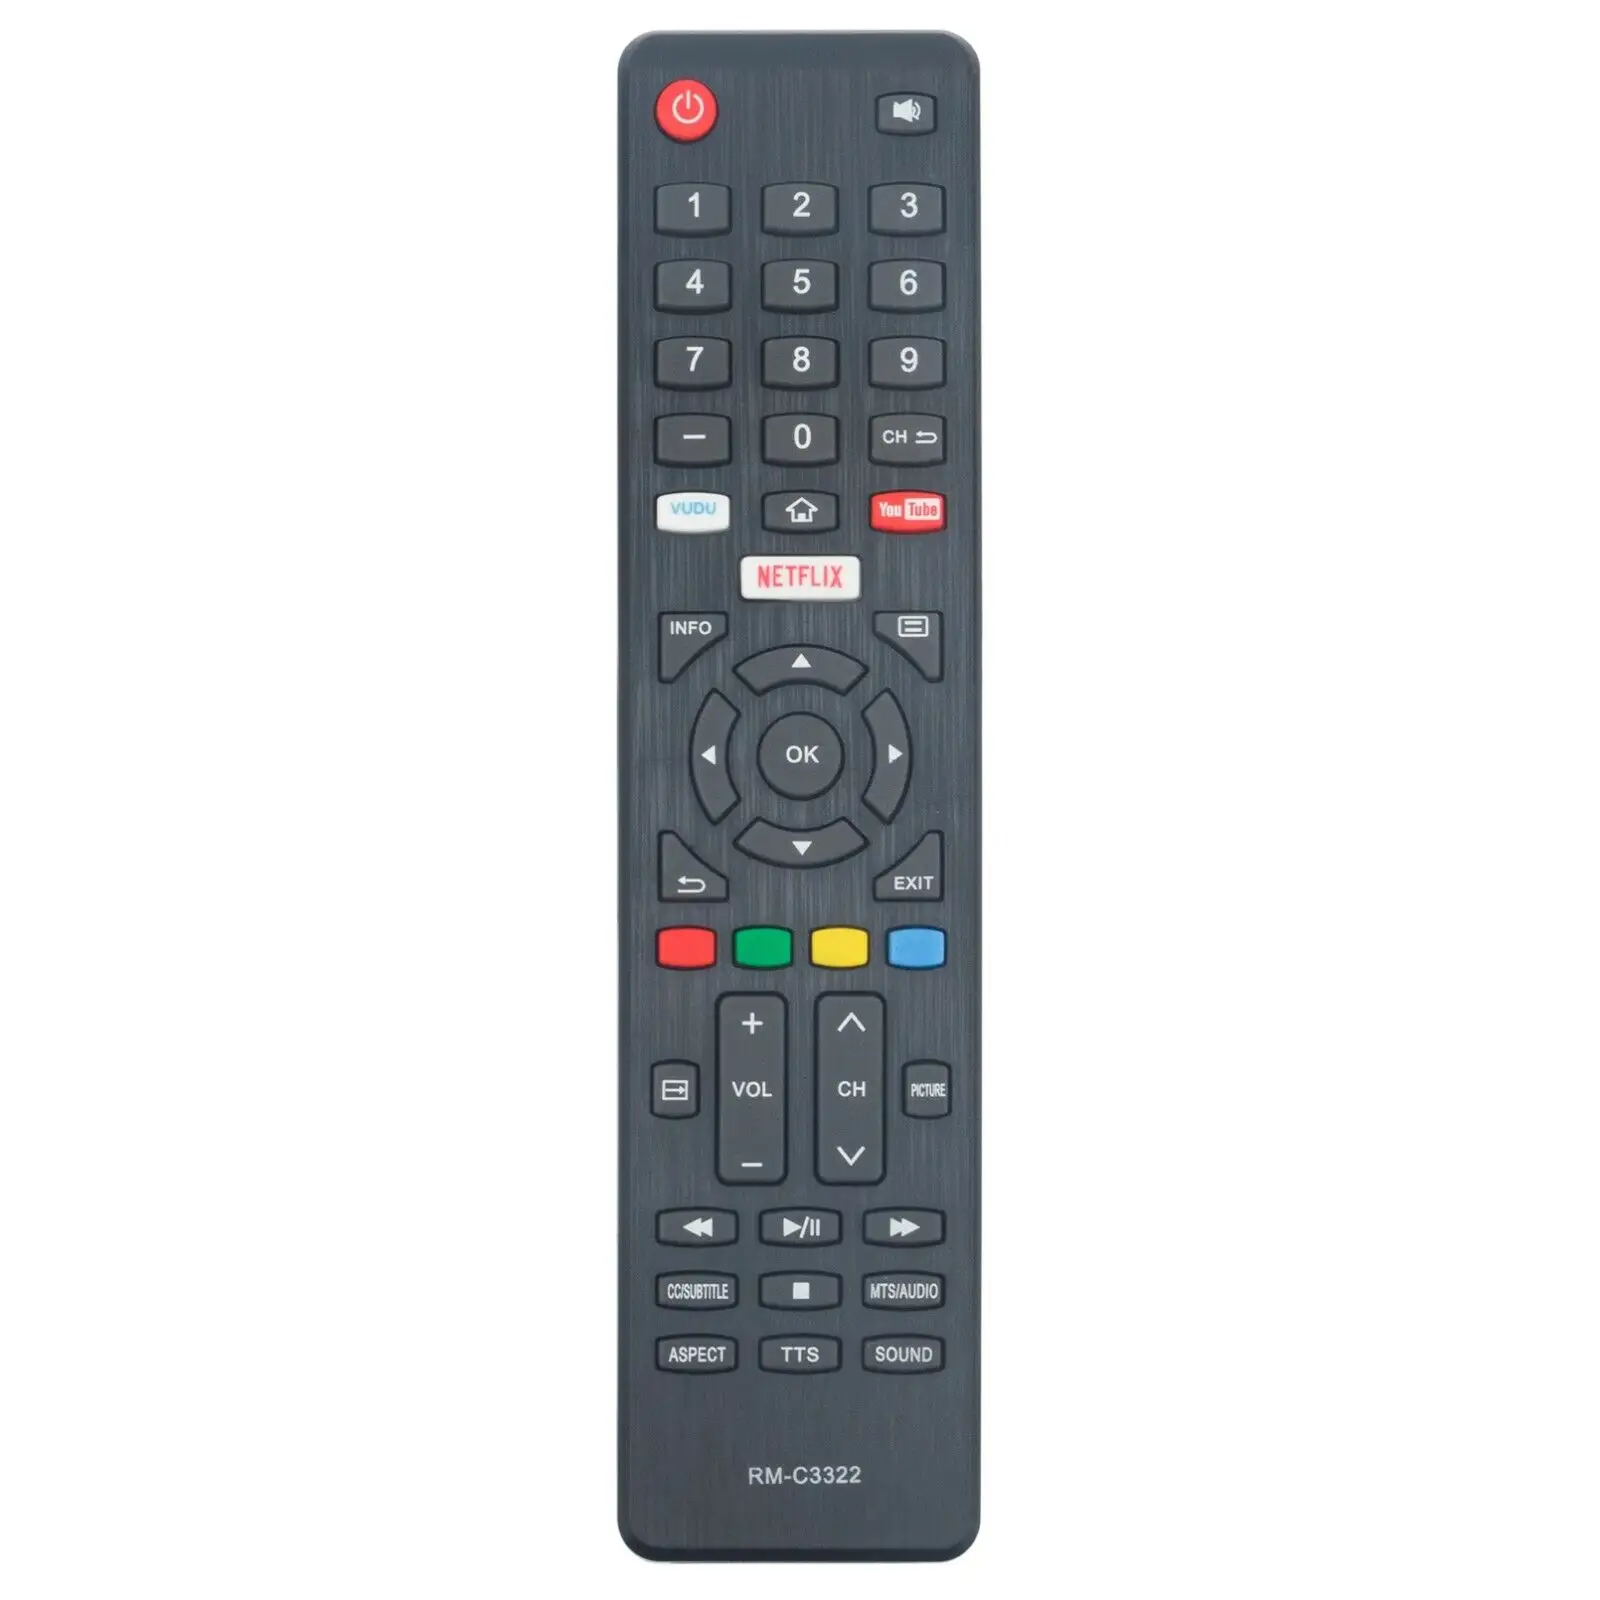 RM-C3322 Replaced Remote Control fit for JVC TV LT65MA877 LT-58MA887 LT-50MA877 LT-43MA877 LT-49MA877 LT-50MA877 LT-55MA877